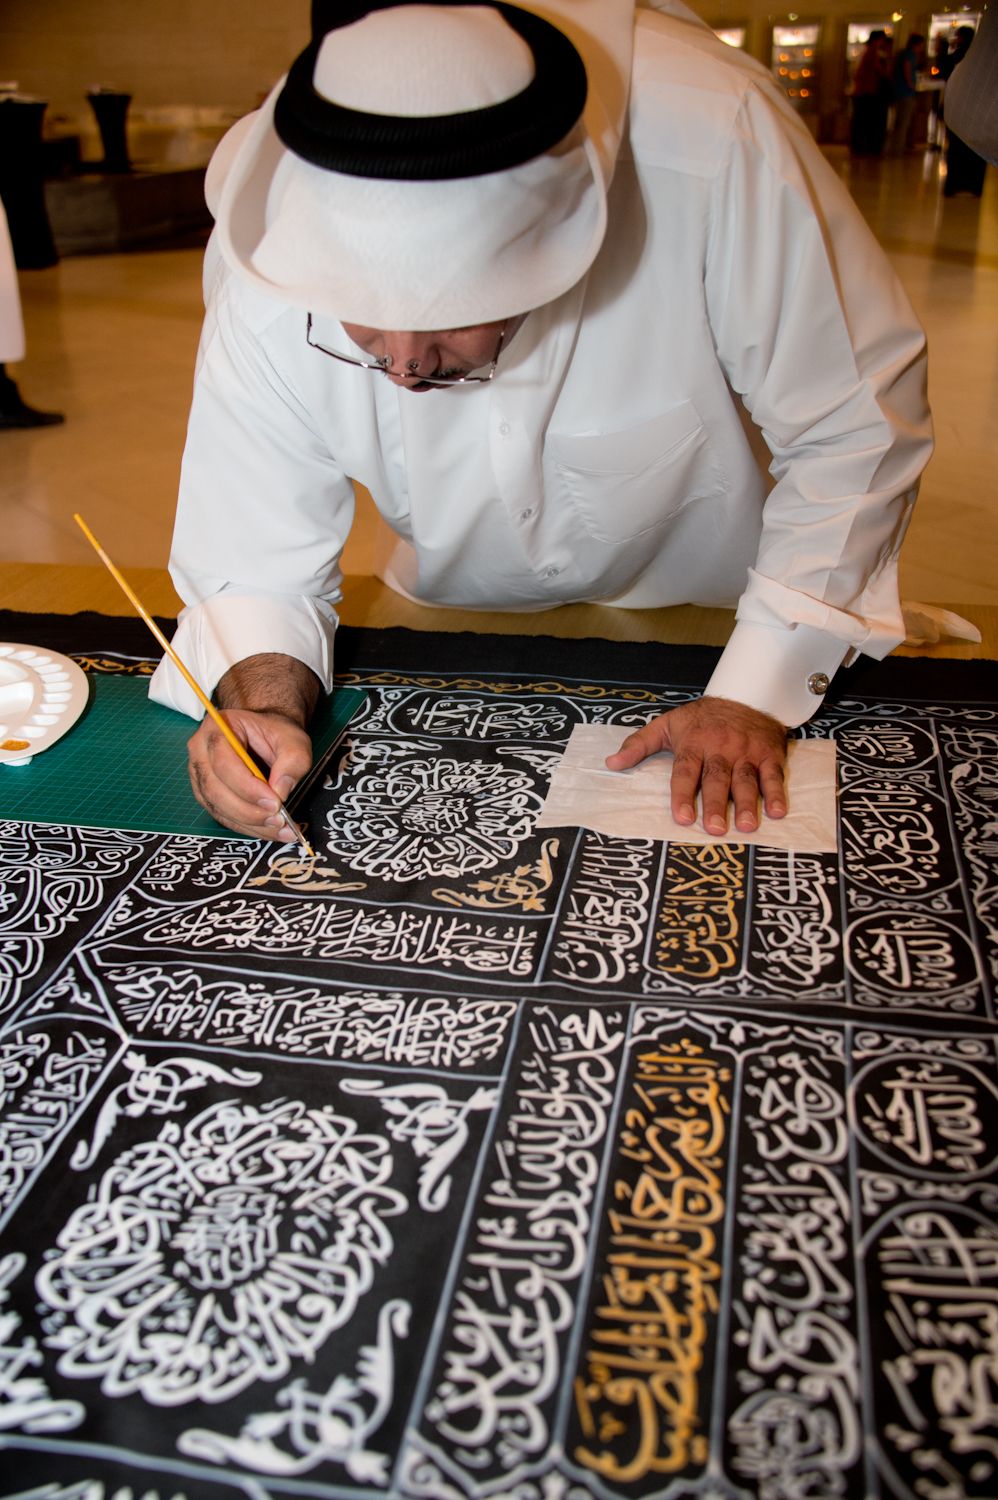 A Middle Eastern artist paints detailed Arabic calligraphy onto a black background with white and gold ink.